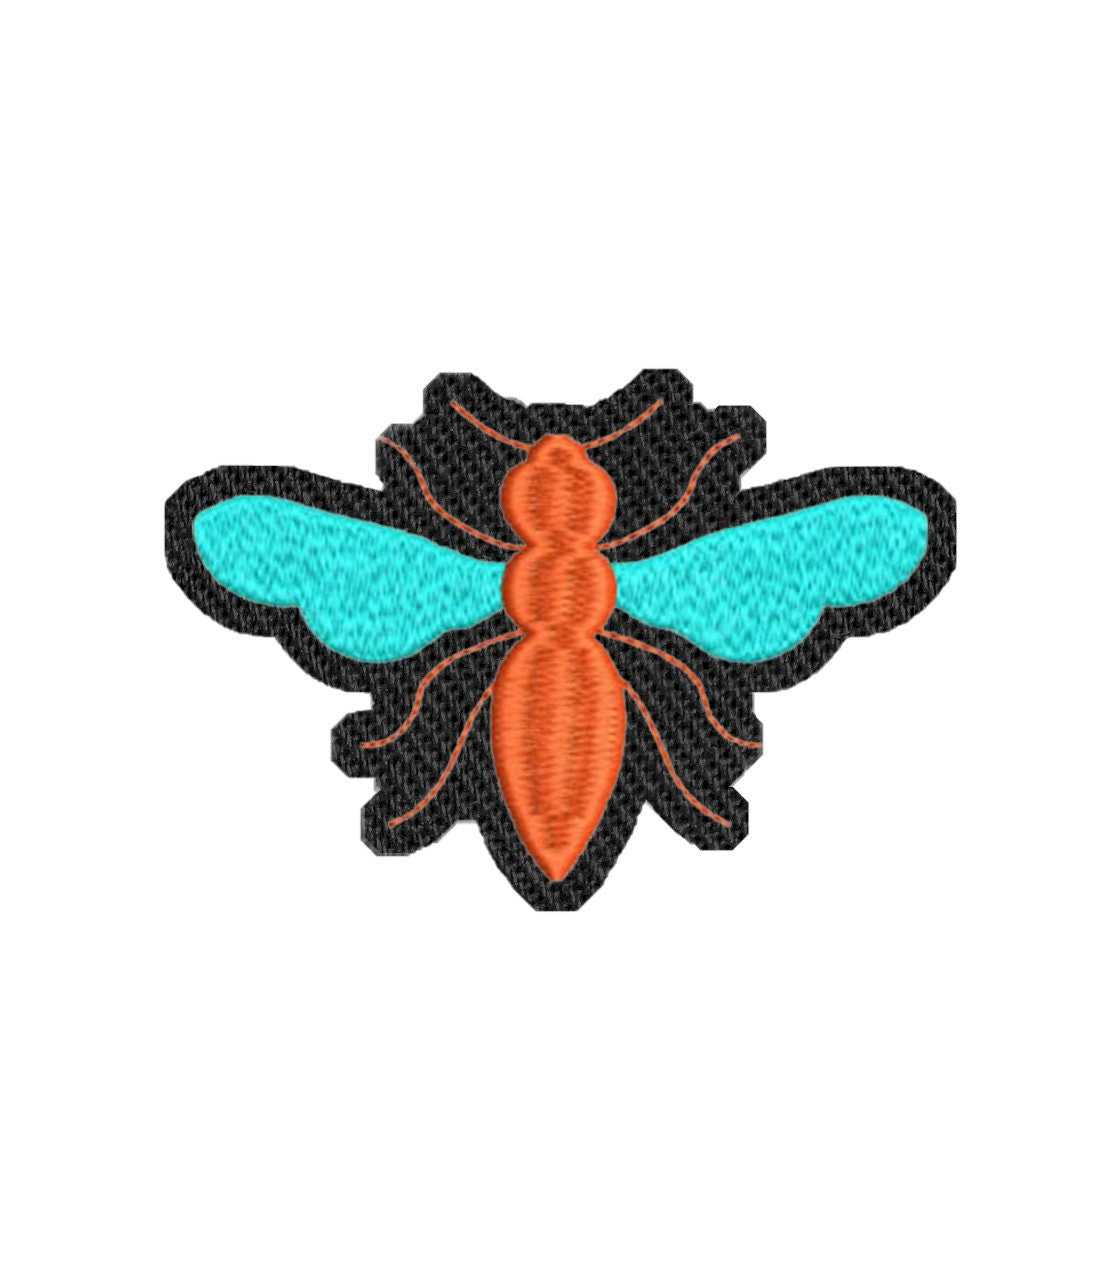 Fly Iron on Patch / Sew on embroidered patches - Animals Bugs & Insects Embroidery Women Applique Merit for Clothing Jacket